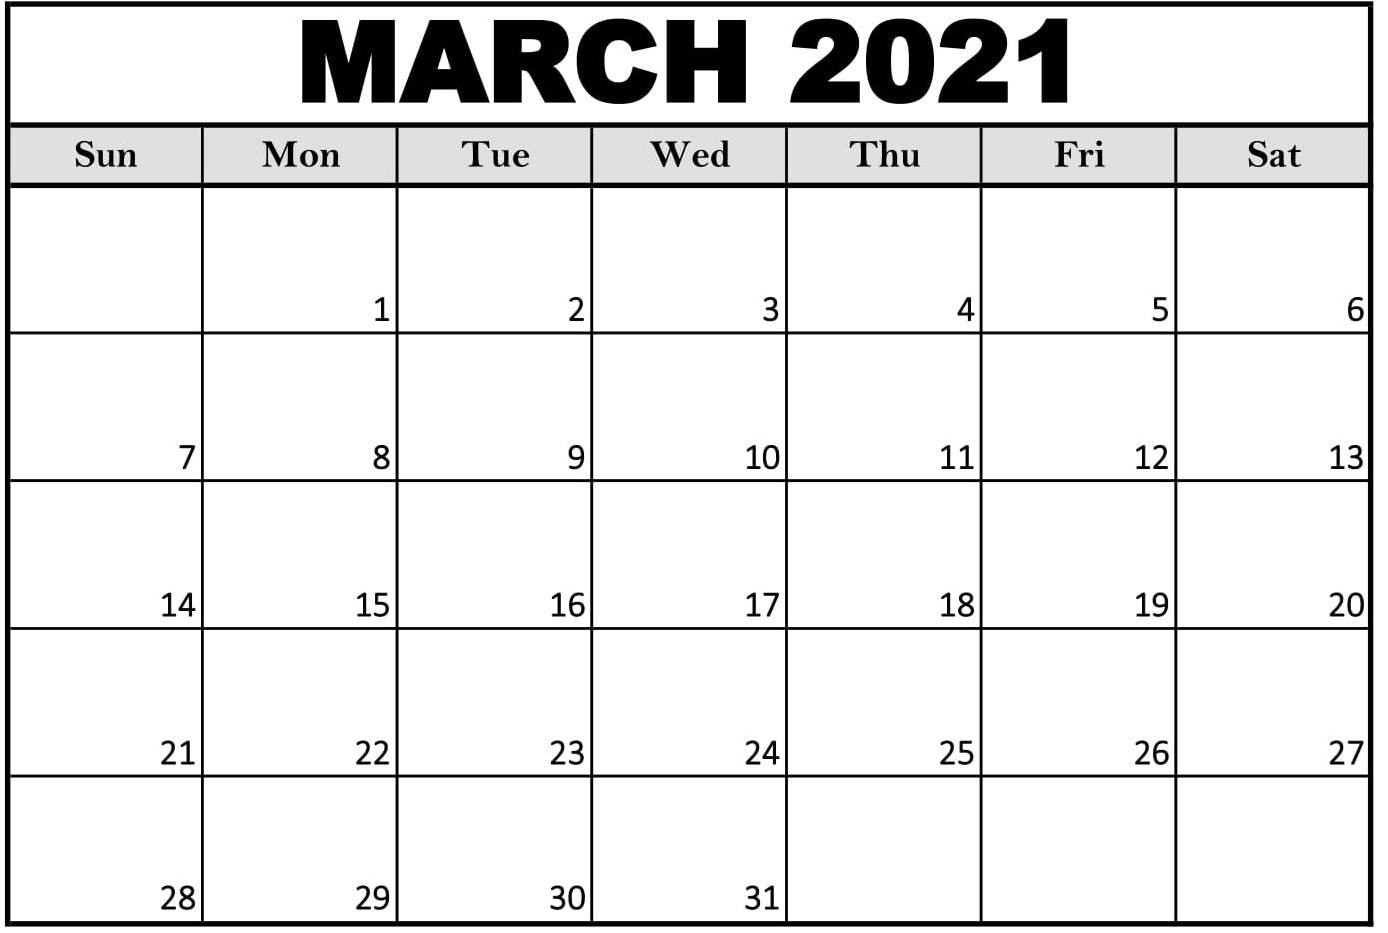 Free Printable March 2021 Calendar With Notes - Printable Office Management Worksheets &amp; Tools Calendar From October 2020 To March 2021